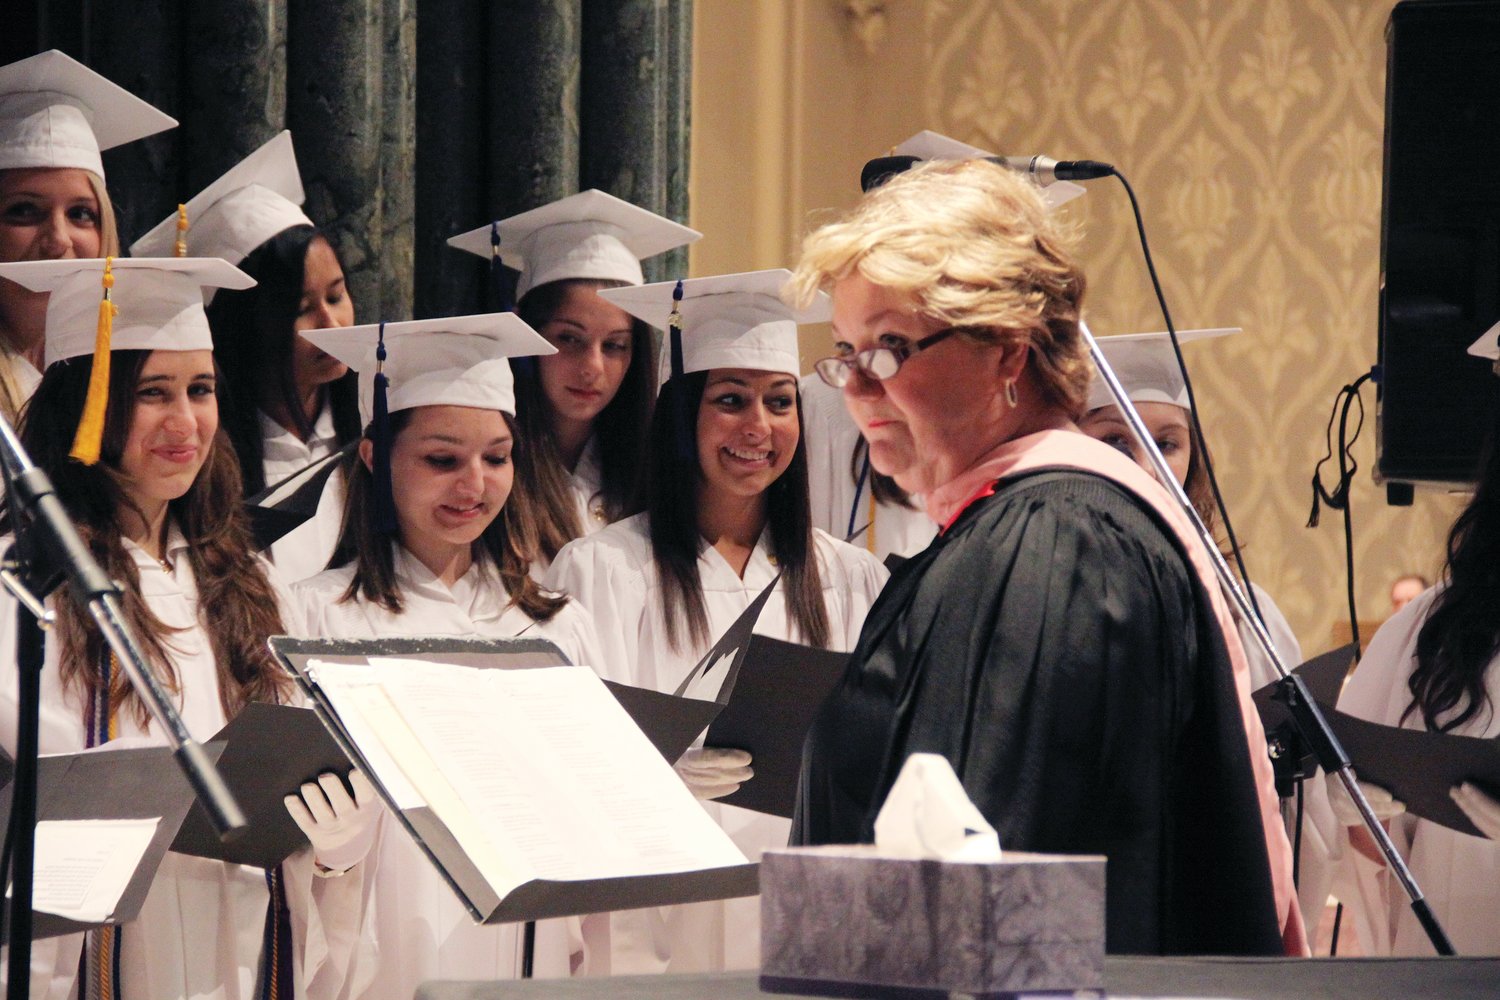 The Bay View Chorale, under the direction of Christine Kavanagh, pictured during the 2011 graduation at the Cathedral of Saints Peter and Paul, Providence. Kavanagh died peacefully on January 6, 2022 at her home. A Mass of Christian Burial was celebrated on January 15, 2022, in the cathedral.